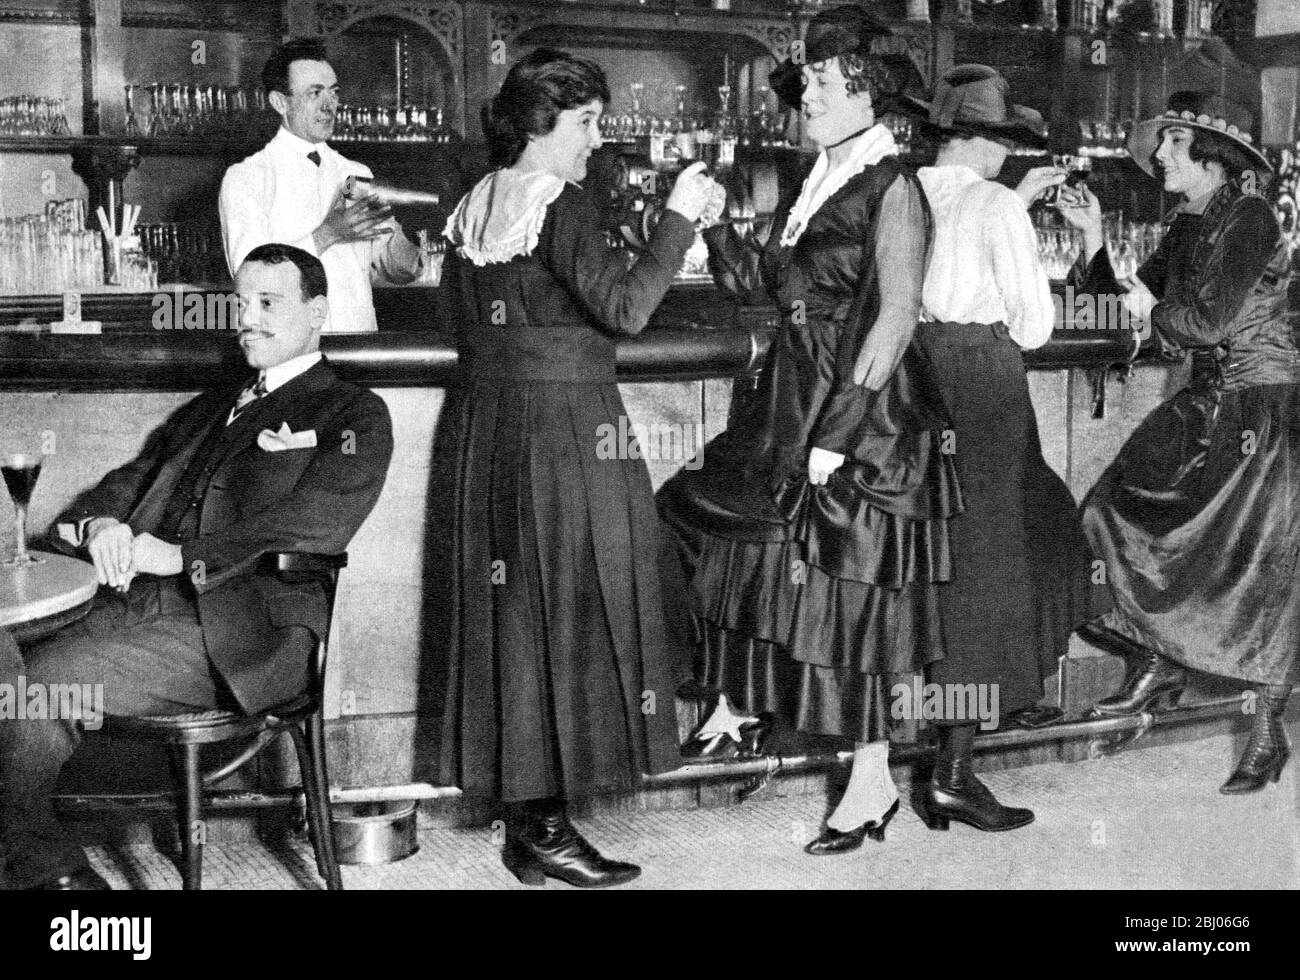 After breaking into jobs they flocked into the pubs. Feet on the bar rail and no lack of self confidence. This is the 1918 scene when one hotel admitted women to its bar, and men took a back seat. That cocktail shaker is the sign of the new age which was soon to merge into the wild twenties when women drank as much as or more that their men folk. - Stock Photo